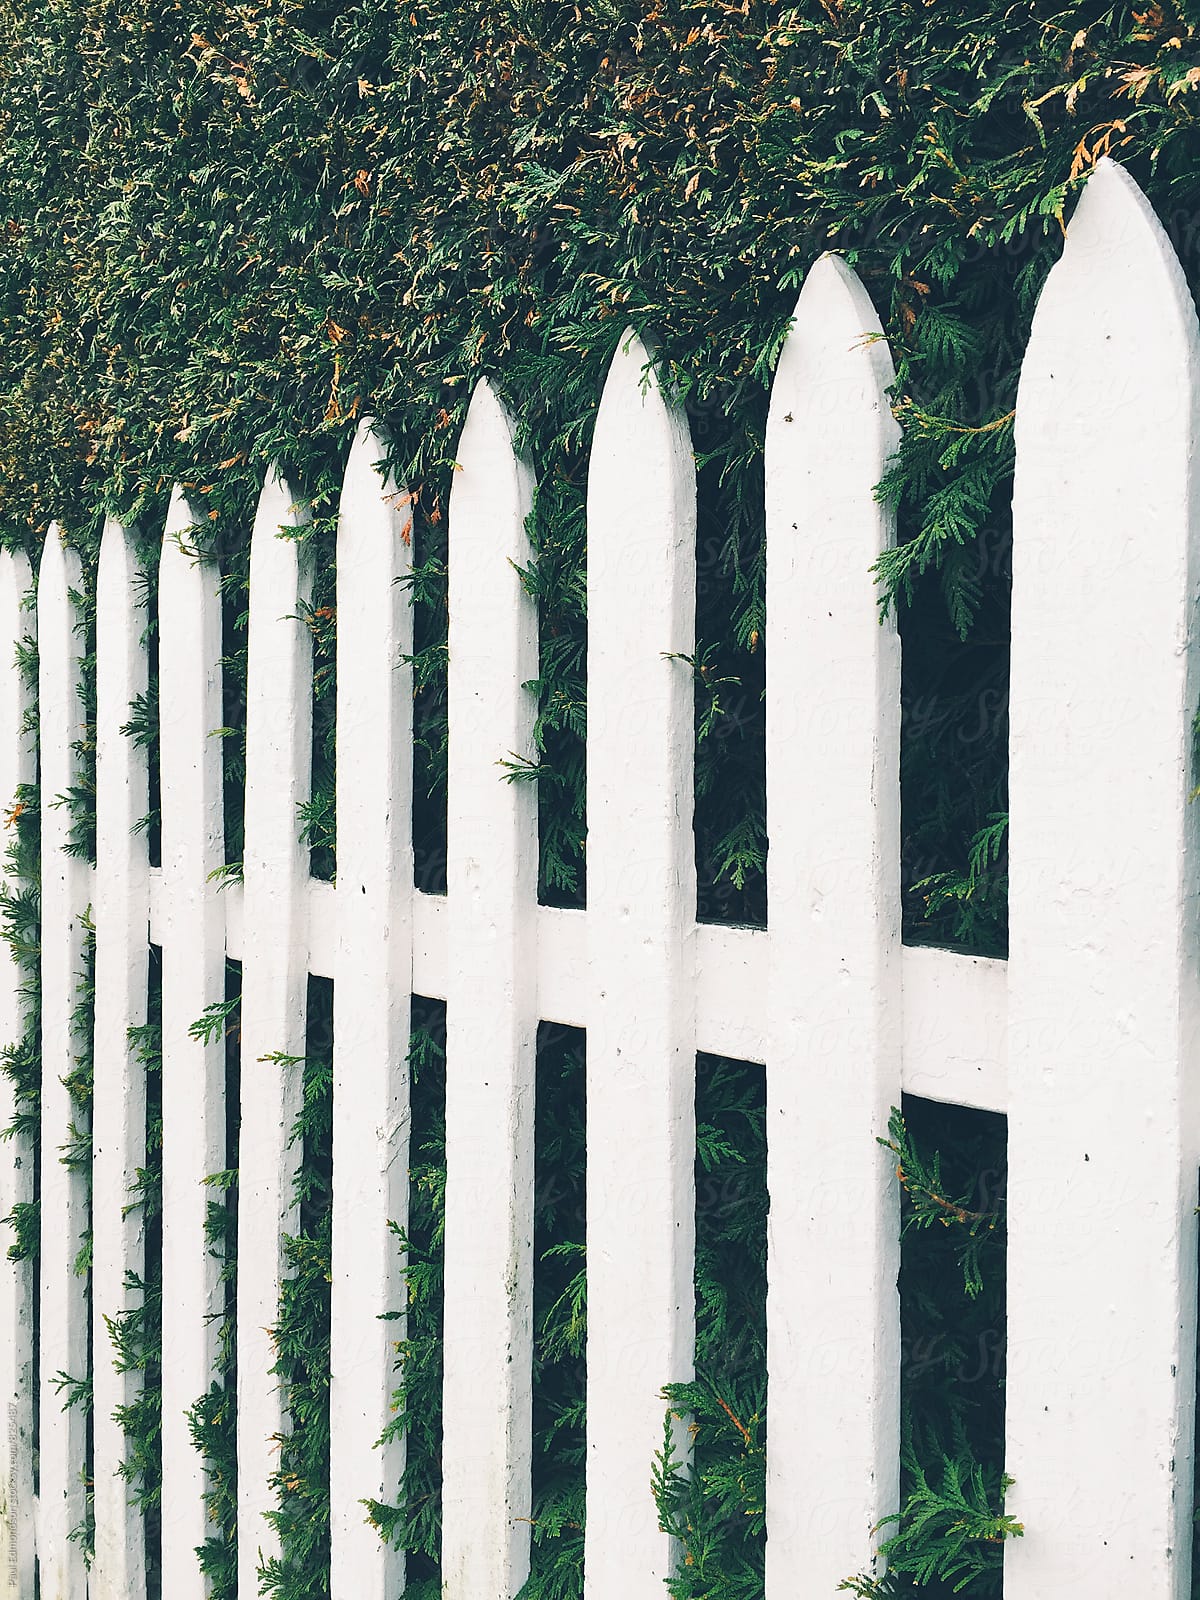 White picket fence in front of green hedge